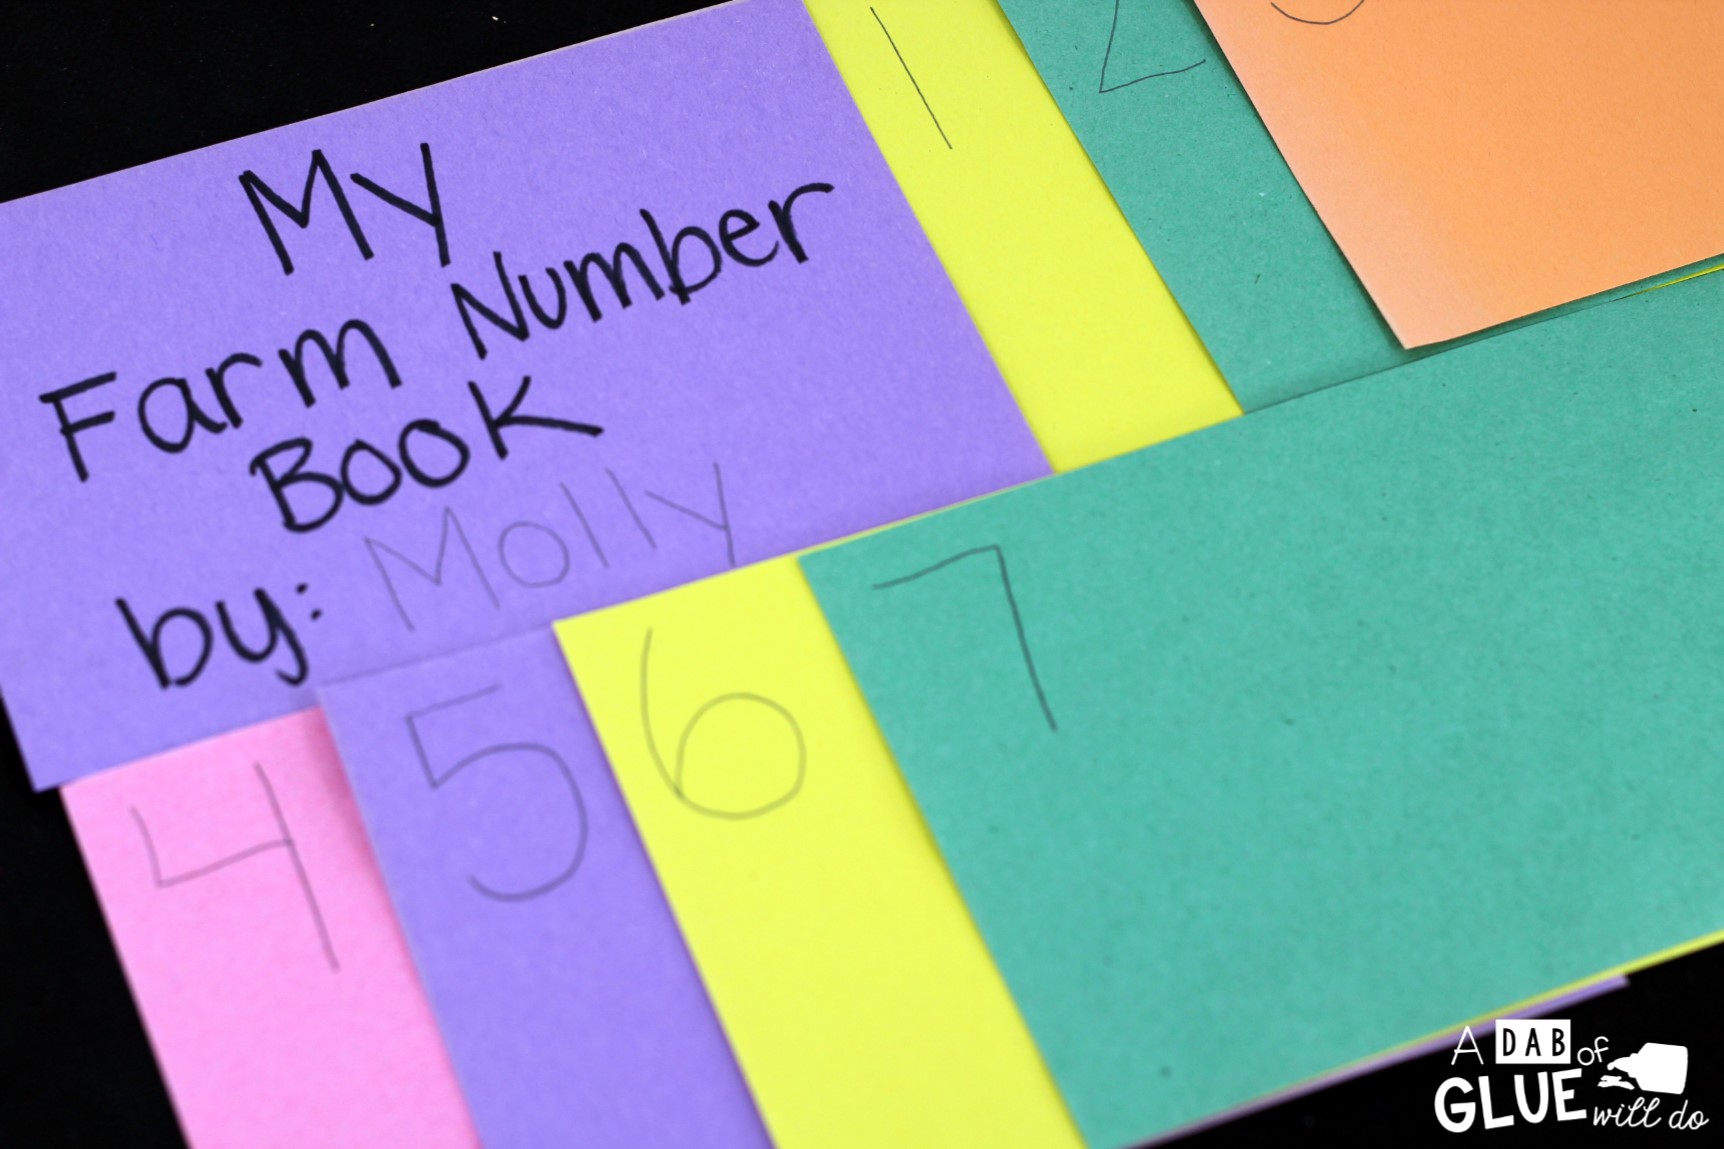 DIY Farm Number Book is a great way for preschool and kindergarten students to practice fine motor skills, one to one correspondence, and number formation. This is a perfect addition to a farm theme or unit.